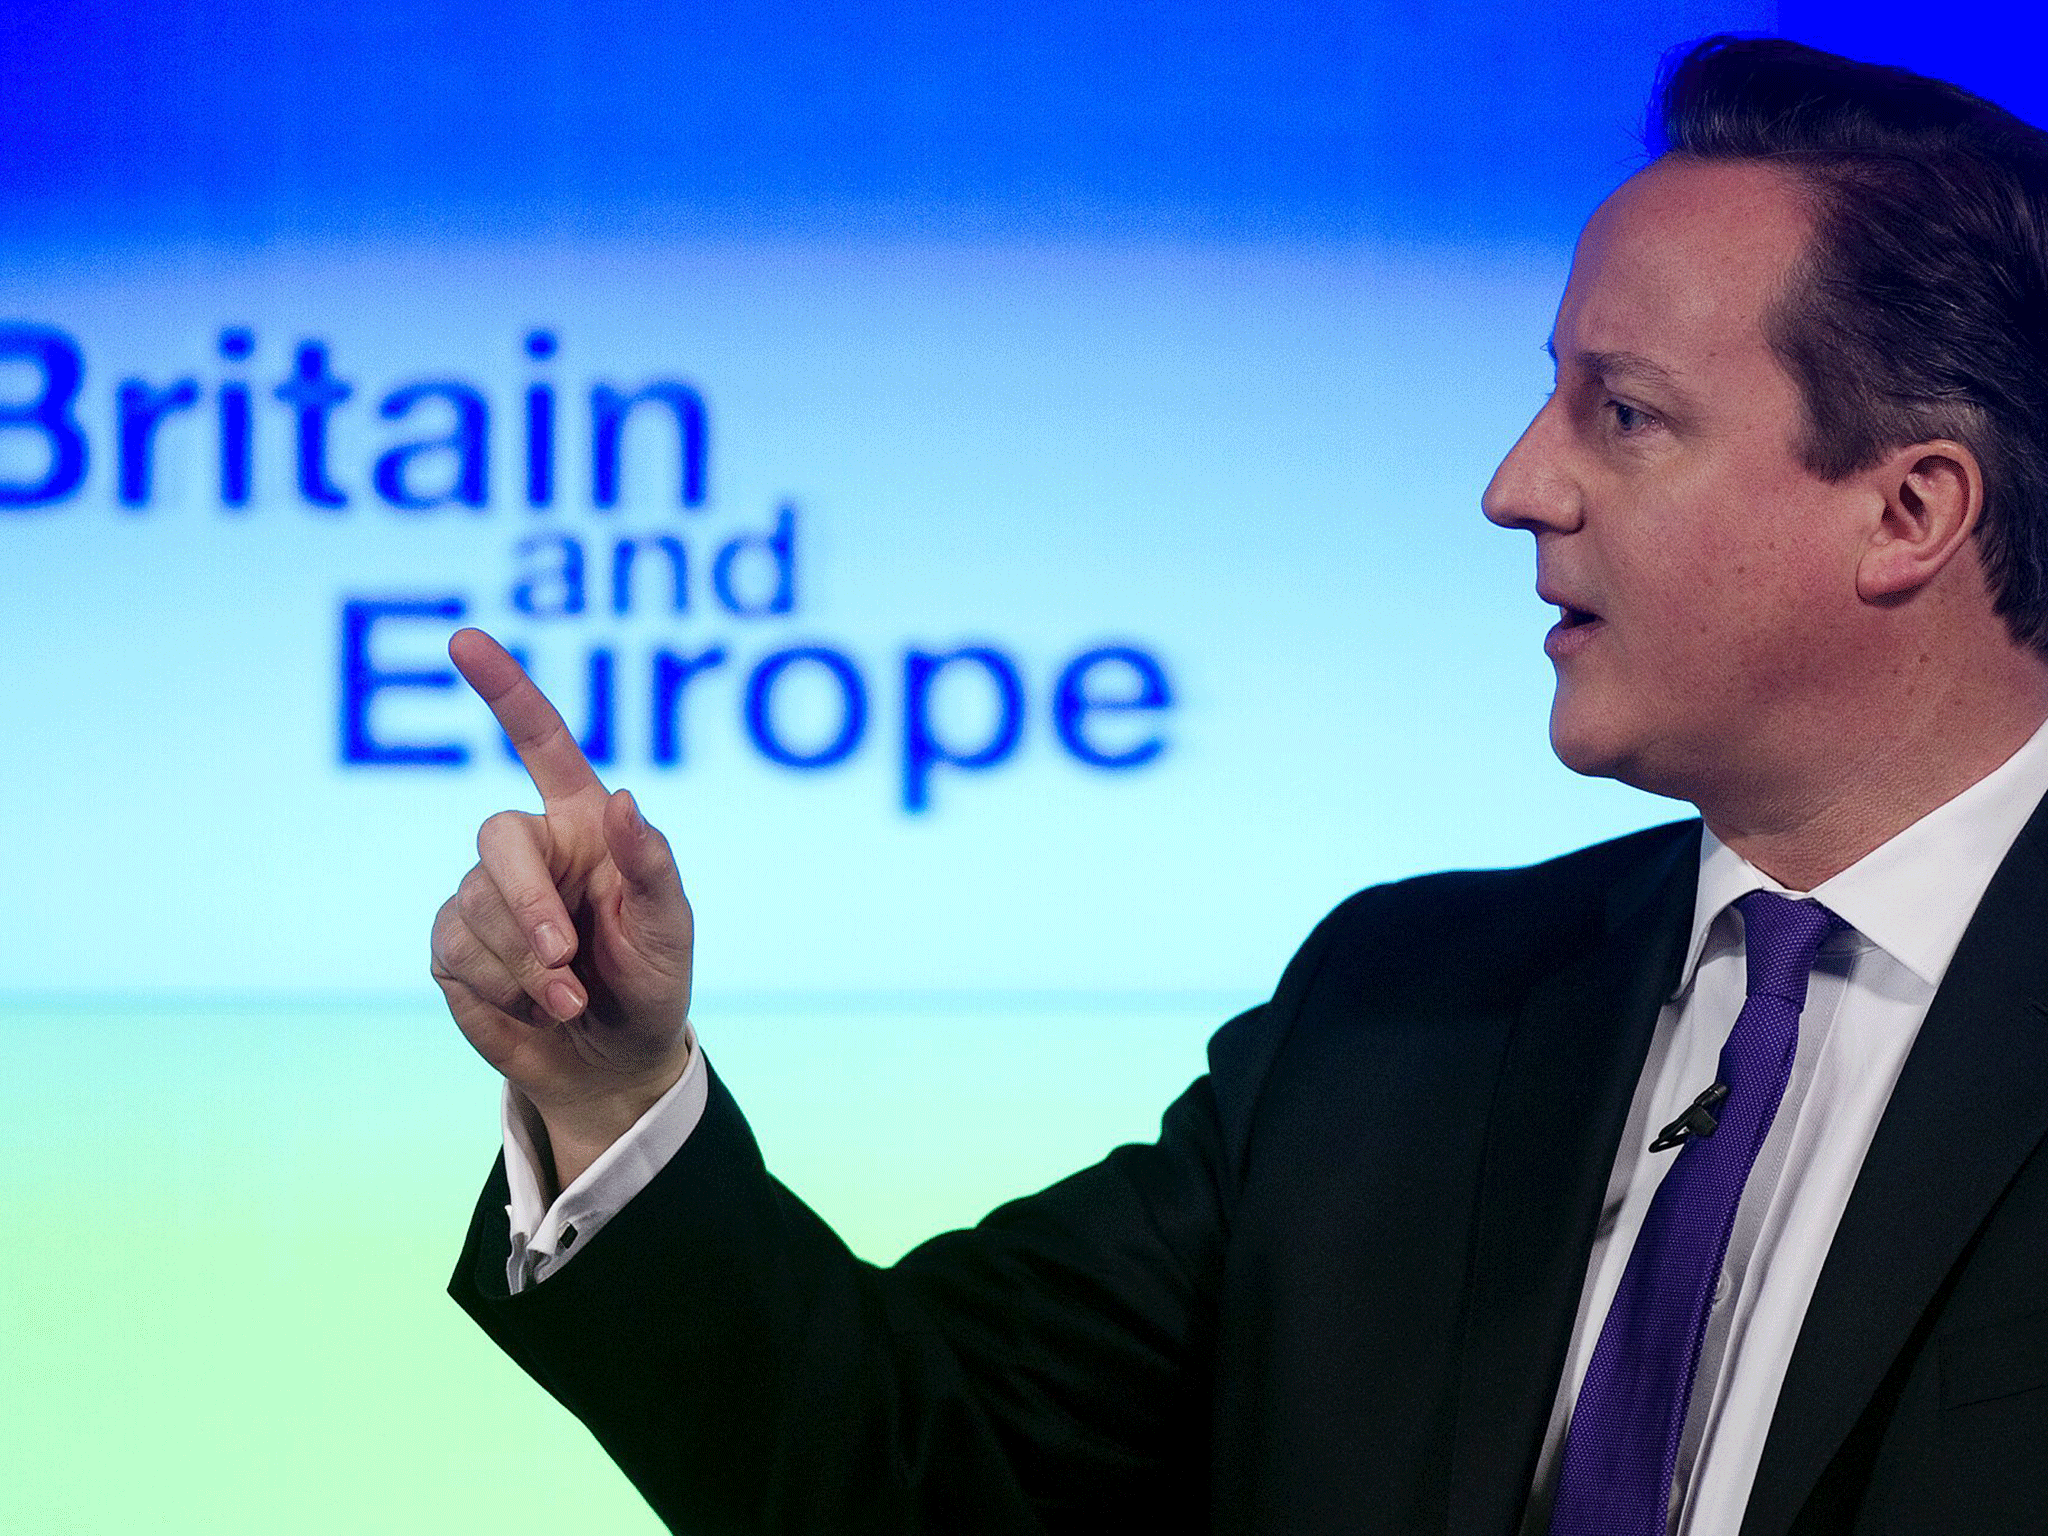 David Cameron delivers his vision for a "Britain in a reformed Europe" at Bloomsberg's London headquarters in 2013